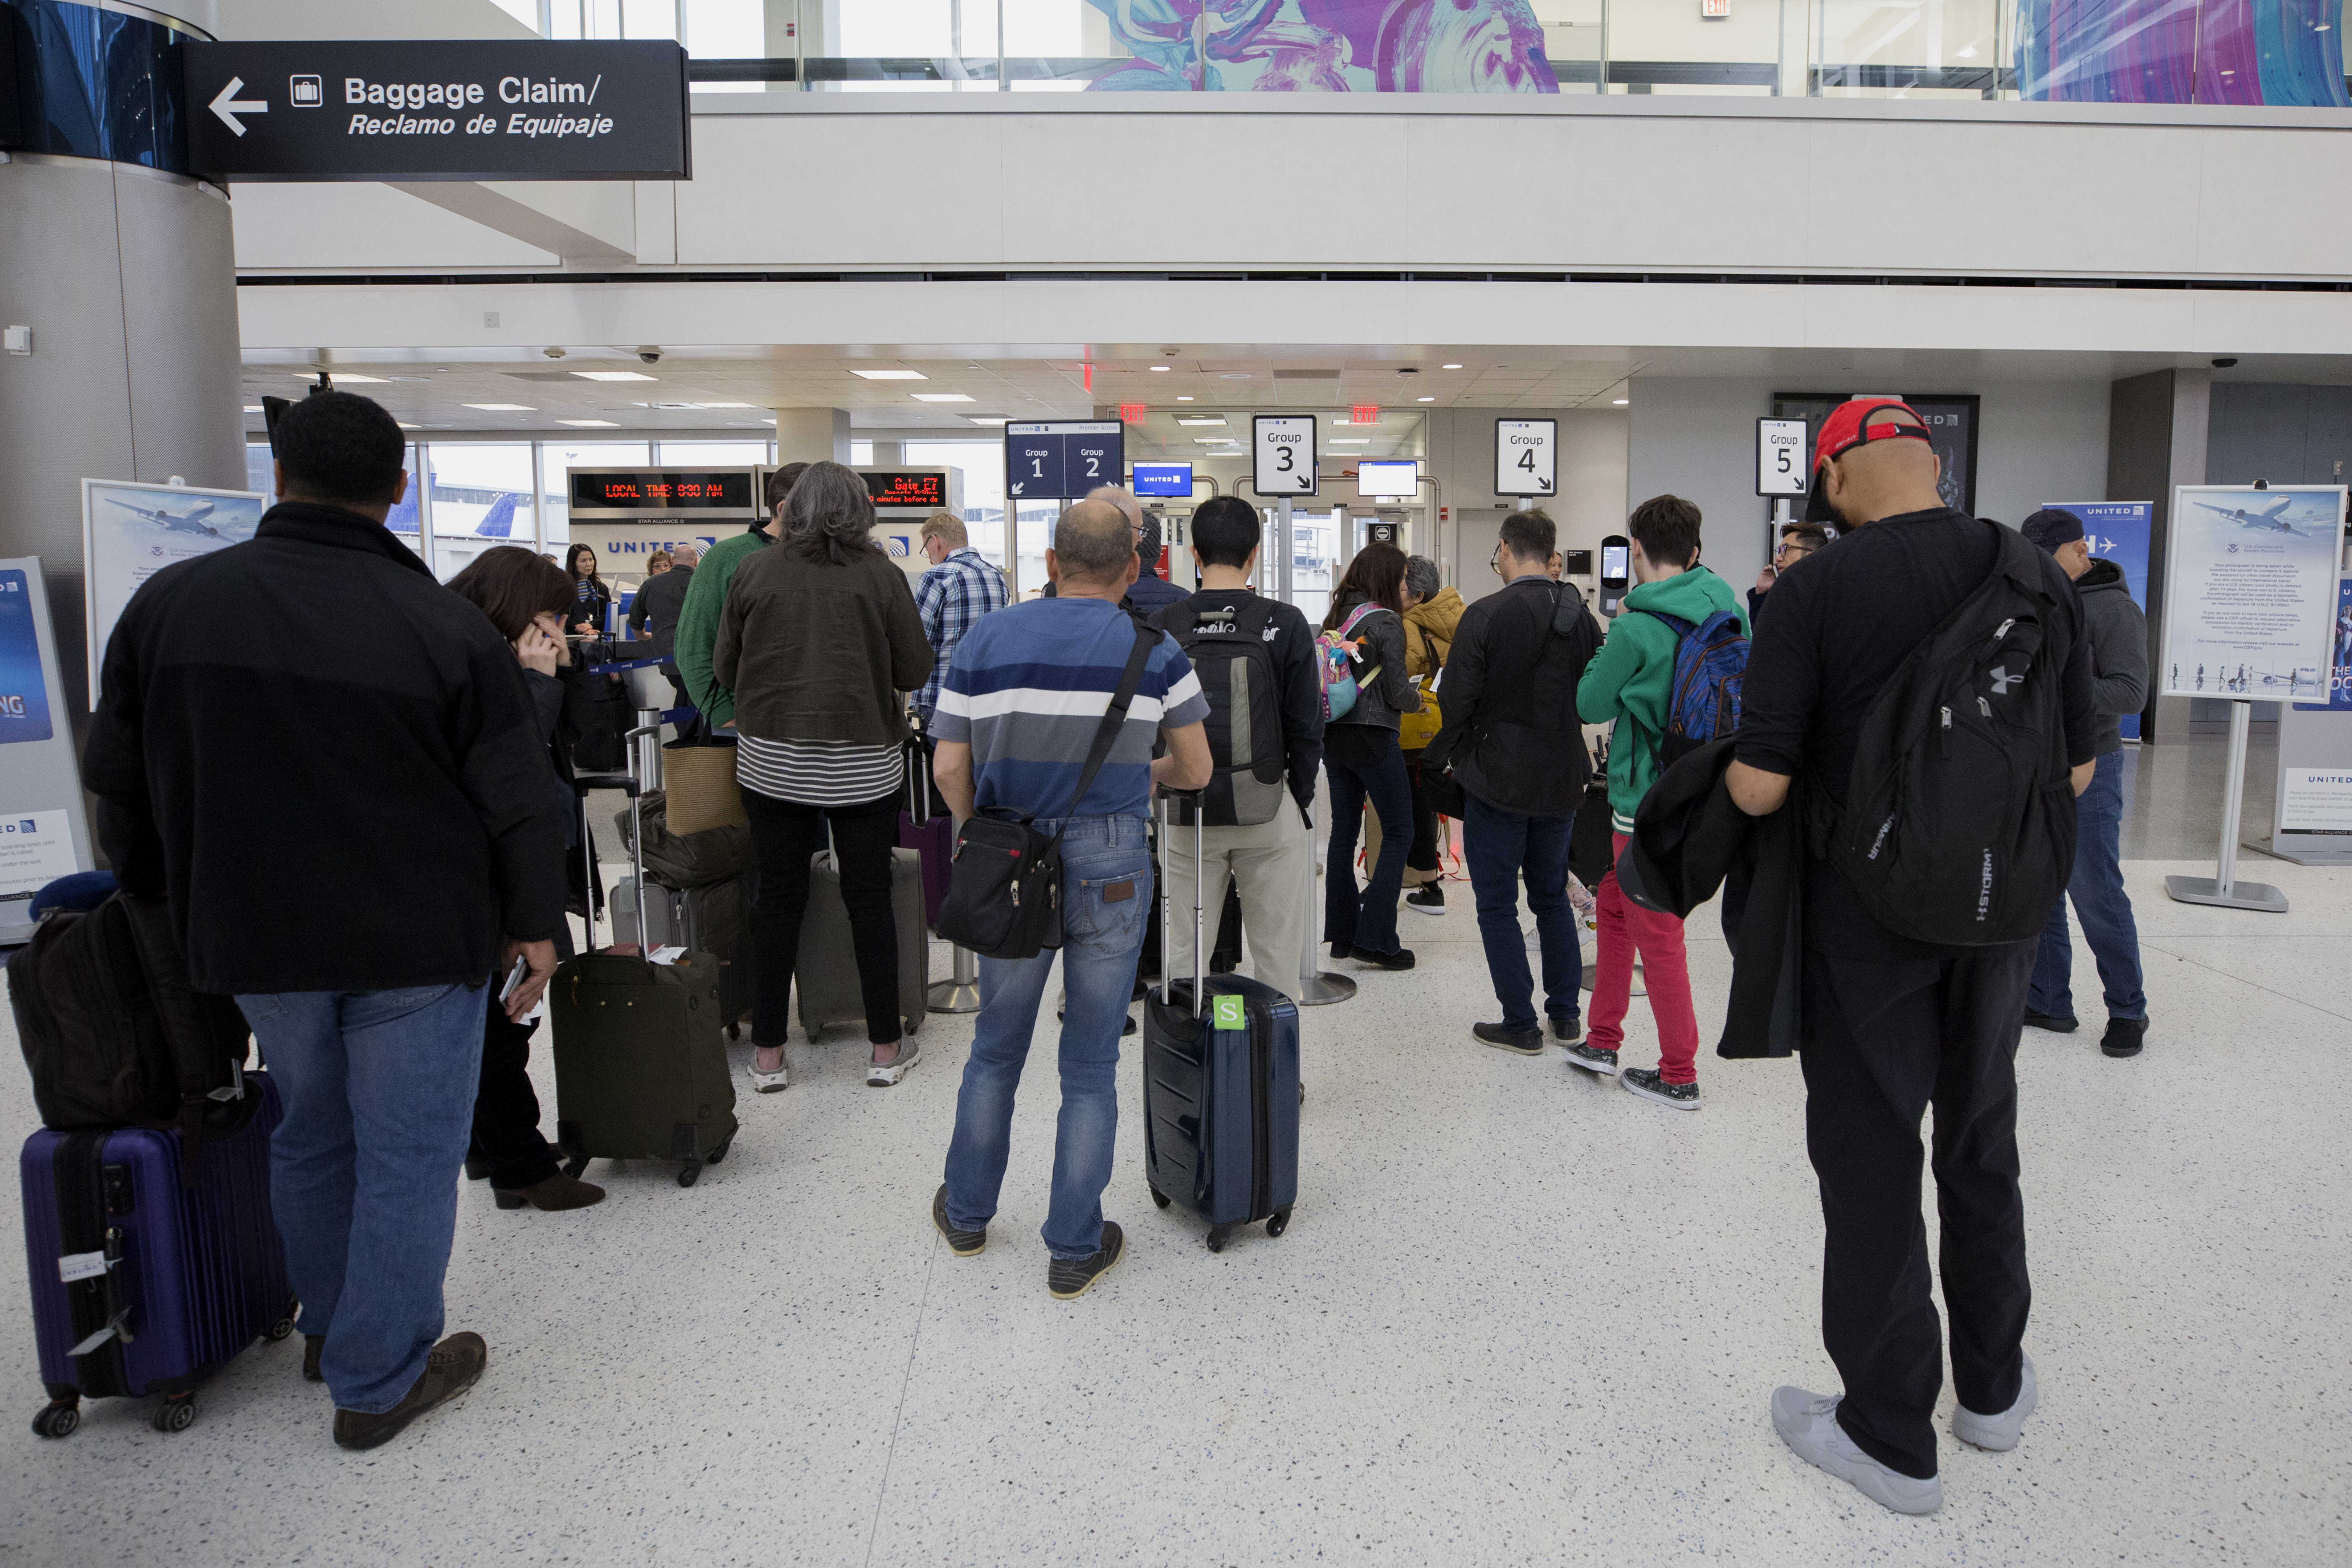 A line of passengers await biometric photos prior to boarding their flight.